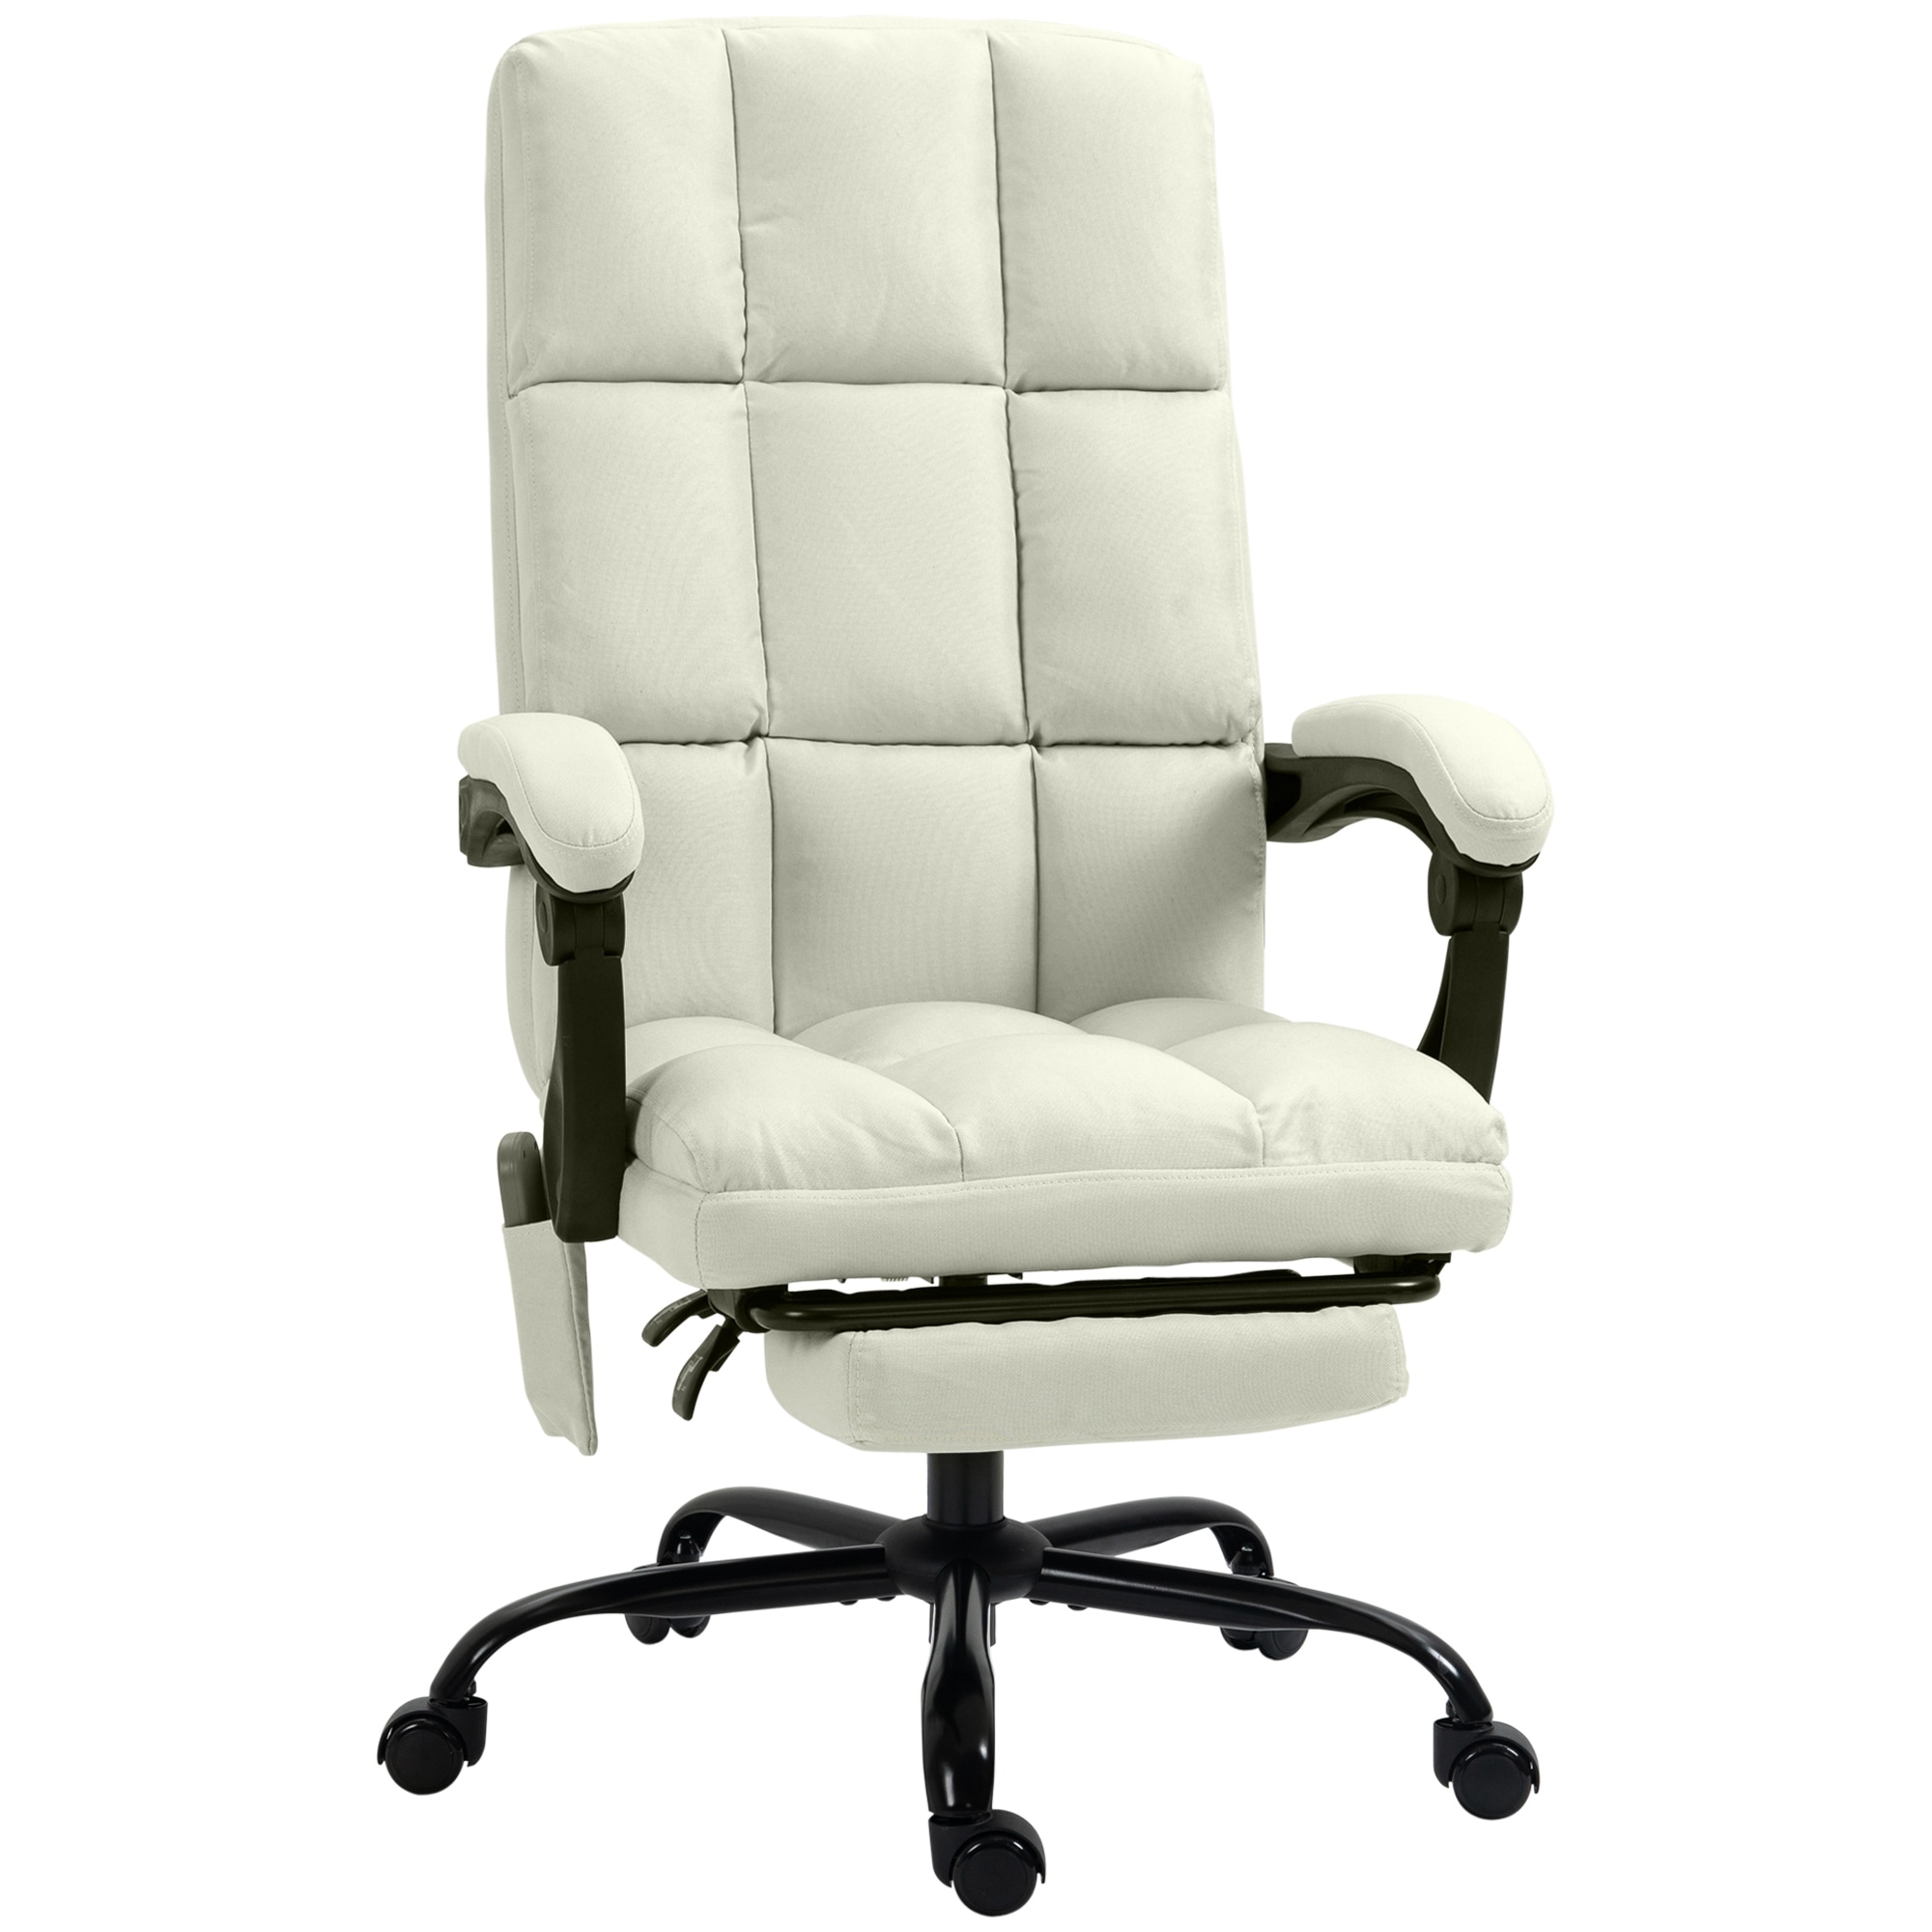 https://ak1.ostkcdn.com/images/products/is/images/direct/846d4a124df904ceb46da5db7493a97841a2270e/Vinsetto-High-Back-Vibration-Massaging-Office-Chair%2C-Reclining-Office-Chair-with-USB-Port%2C-Remote-Control-and-Footrest.jpg